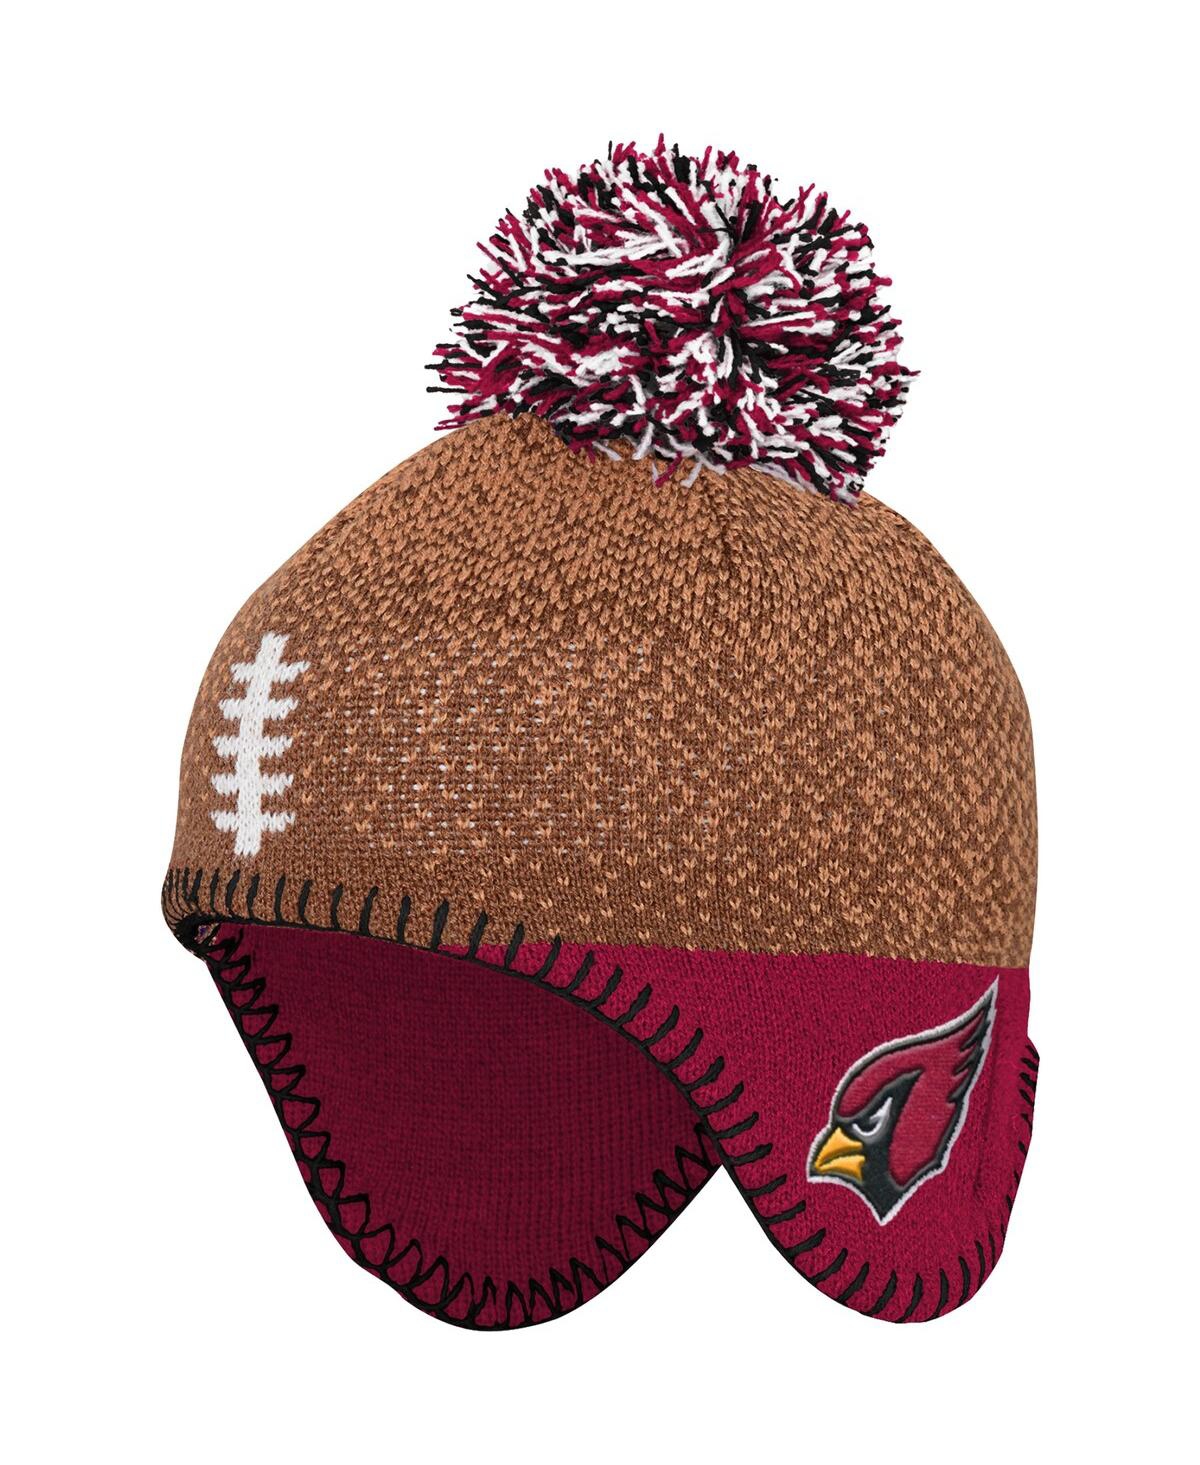 Outerstuff Babies' Newborn And Infant Boys And Girls Brown Arizona Cardinals Football Head Knit Hat With Pom In Brown,cardinal